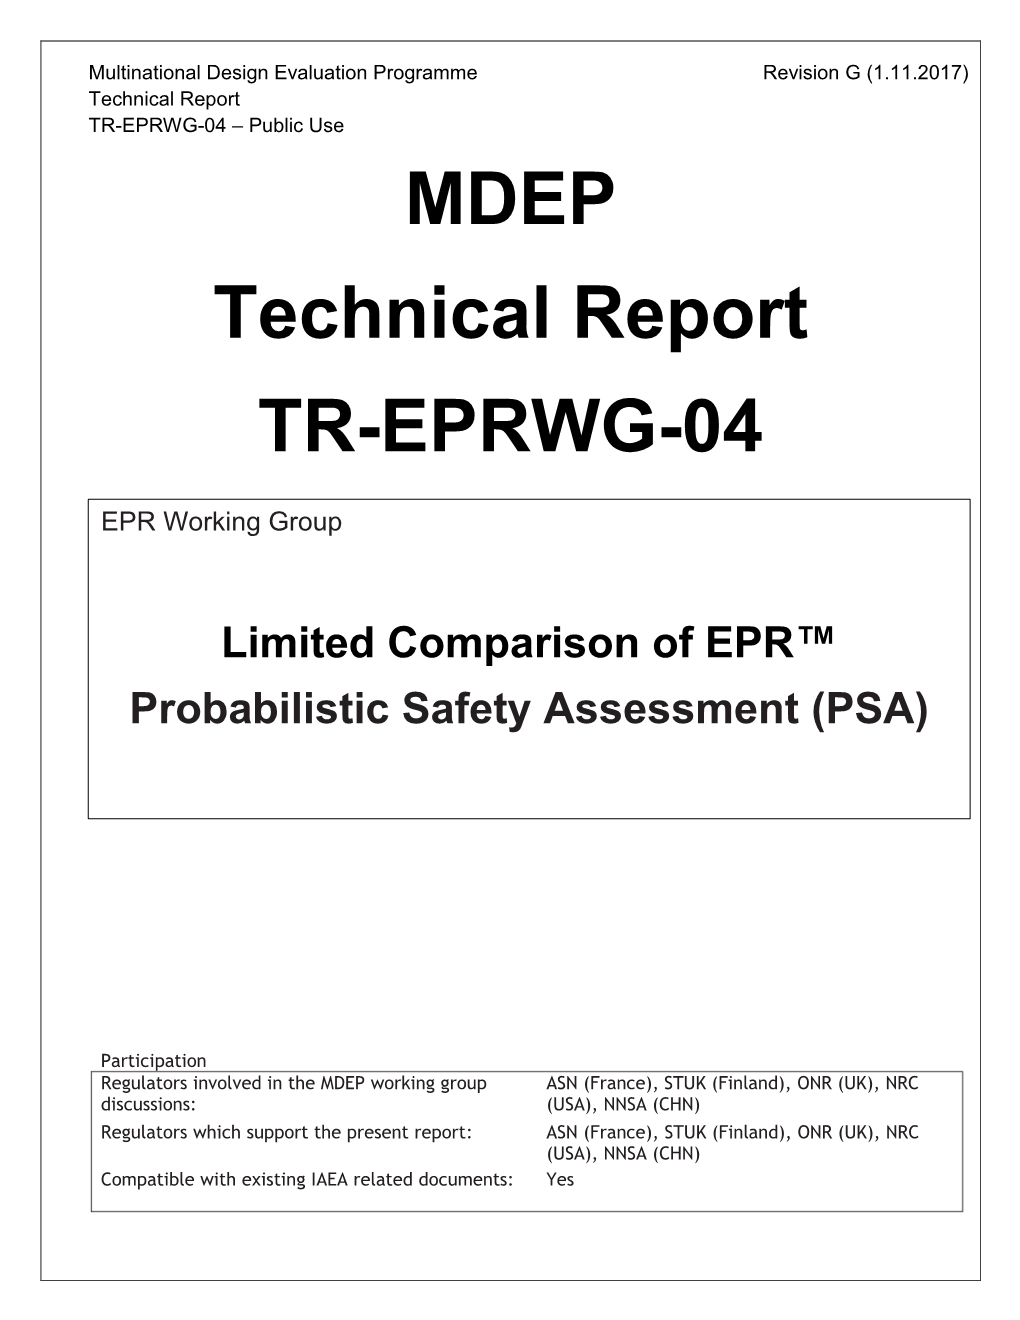 TR-EPRWG-04 Limited Comparison of EPR